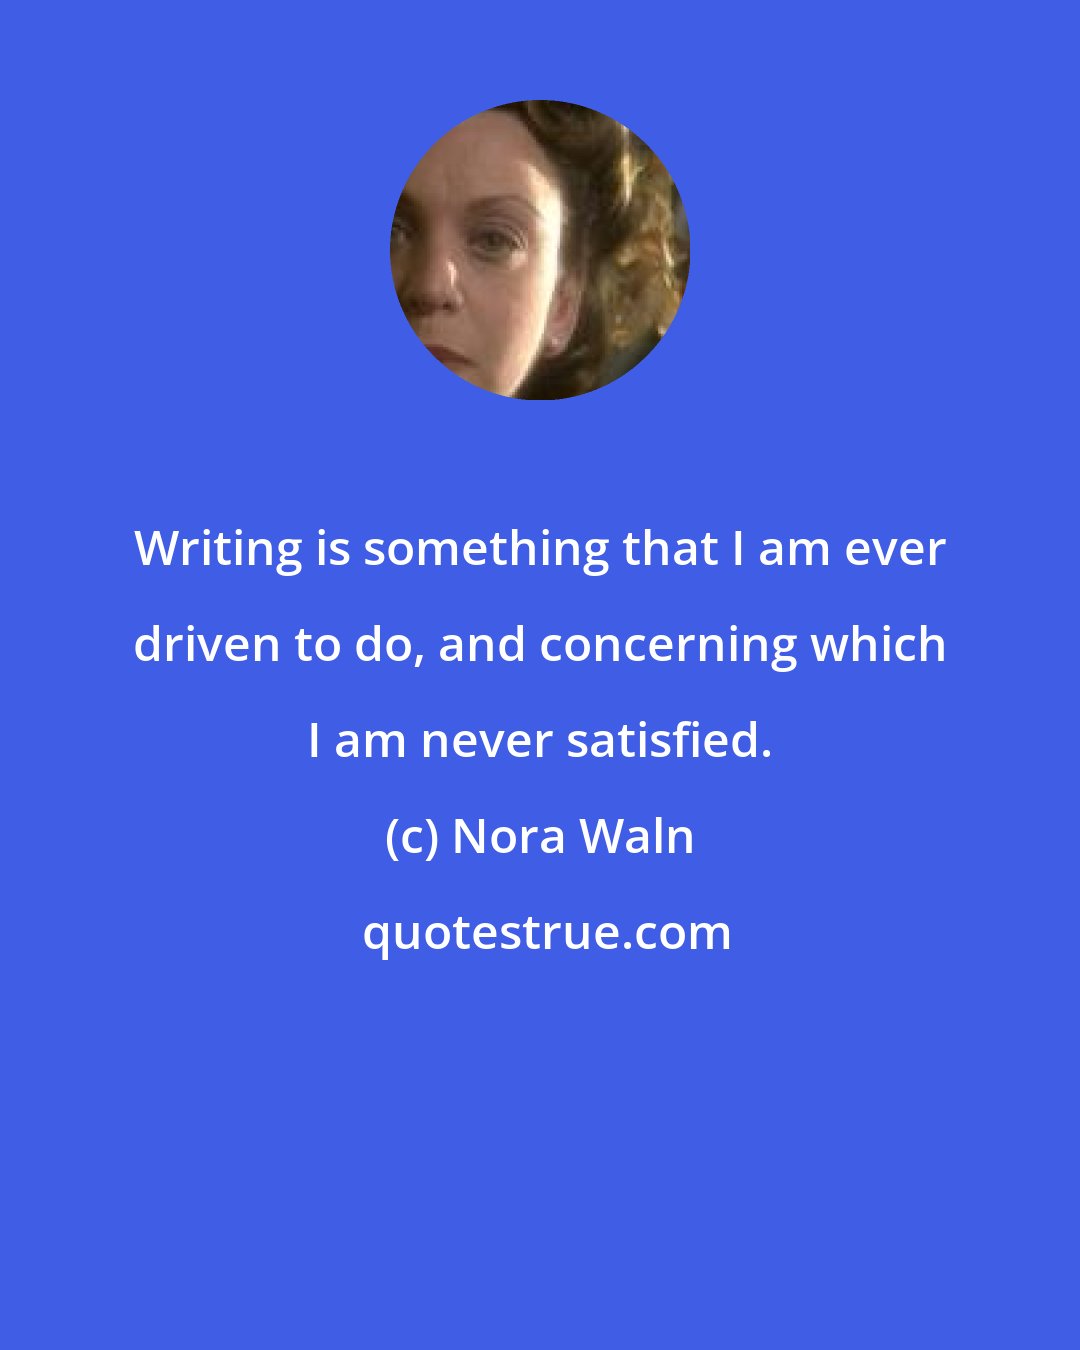 Nora Waln: Writing is something that I am ever driven to do, and concerning which I am never satisfied.